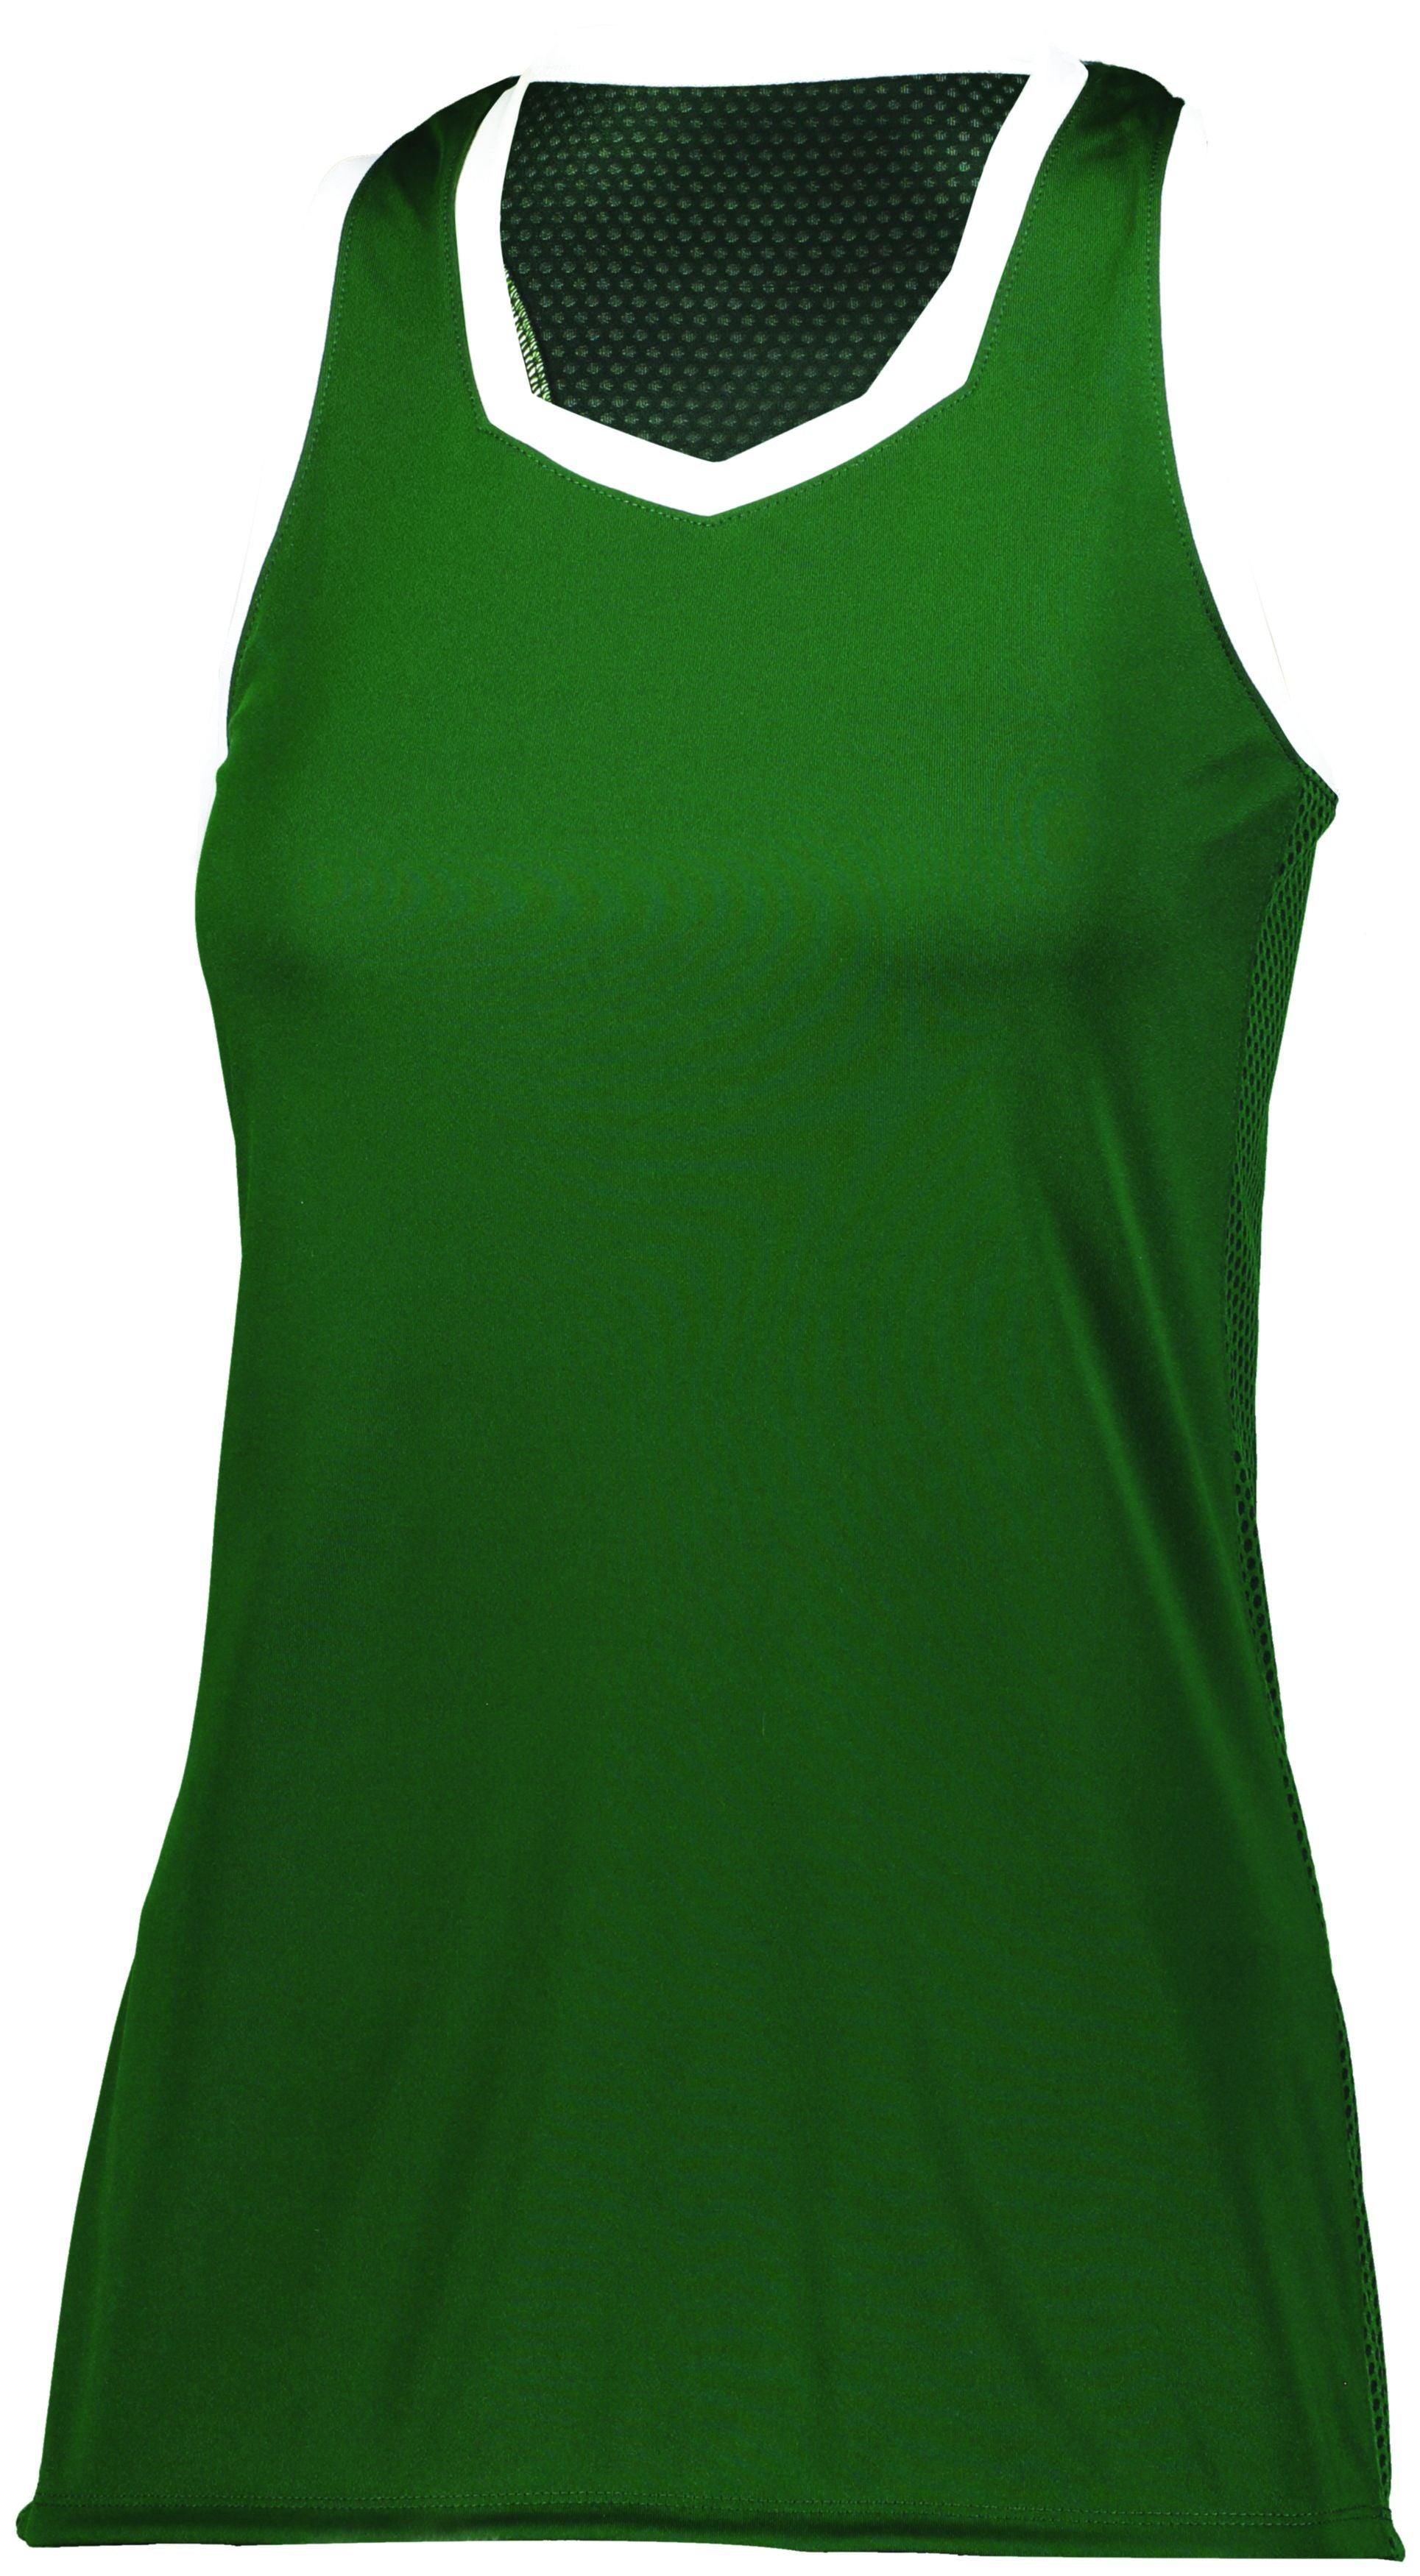 Augusta Sportswear Ladies Crosse Jersey in Dark Green/White  -Part of the Ladies, Ladies-Jersey, Augusta-Products, Shirts product lines at KanaleyCreations.com